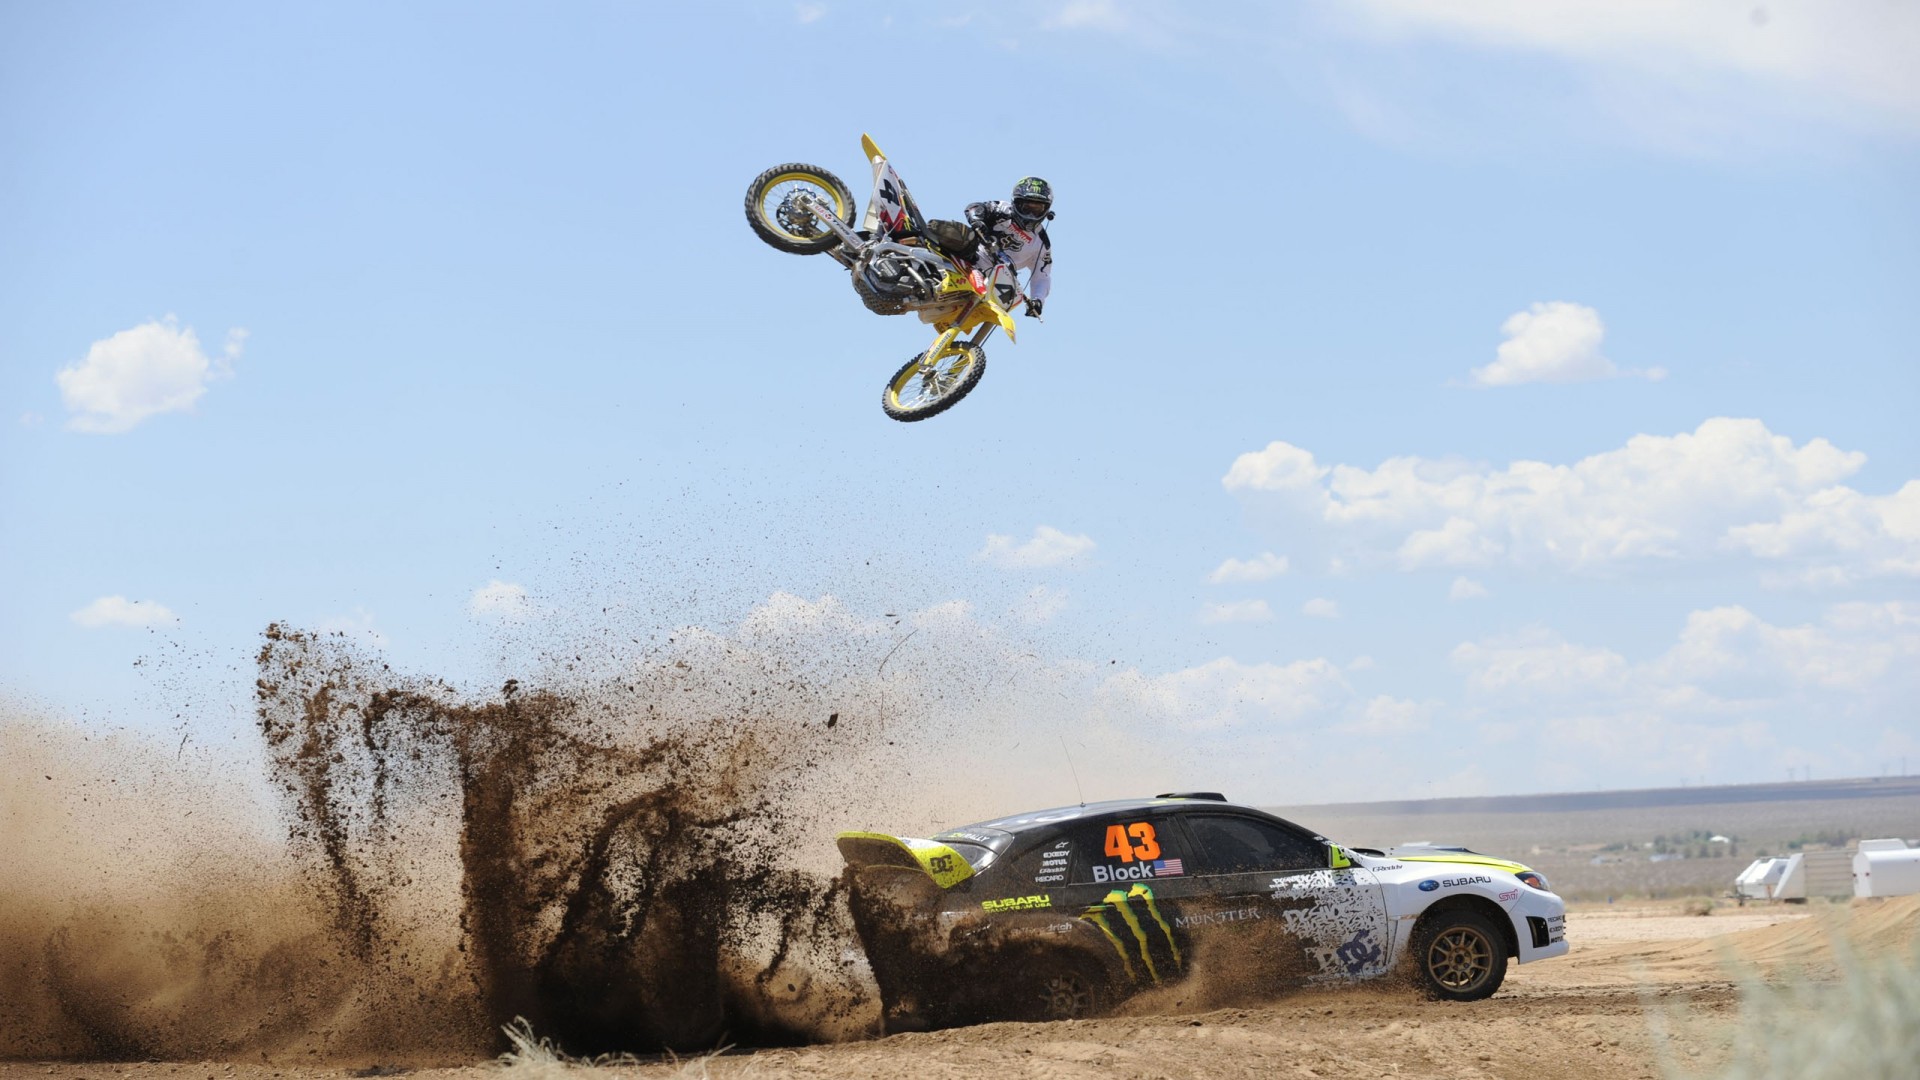 High Quality Motocross HD Wallpaper Full HD Pictures